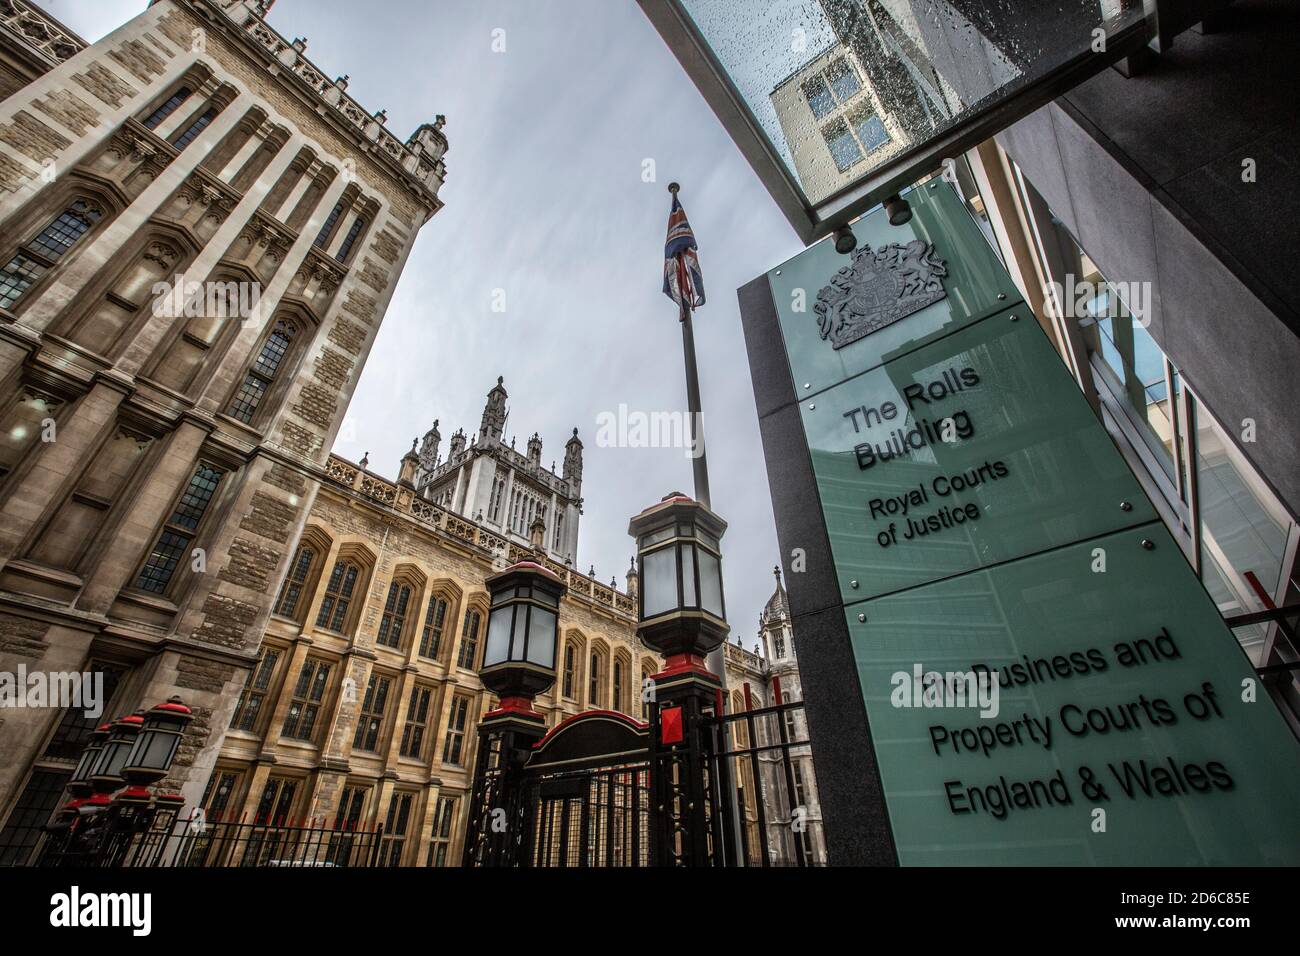 Rolls Building, Business and Property Courts of England, Fetter Lane, City of London, England, Vereinigtes Königreich Stockfoto